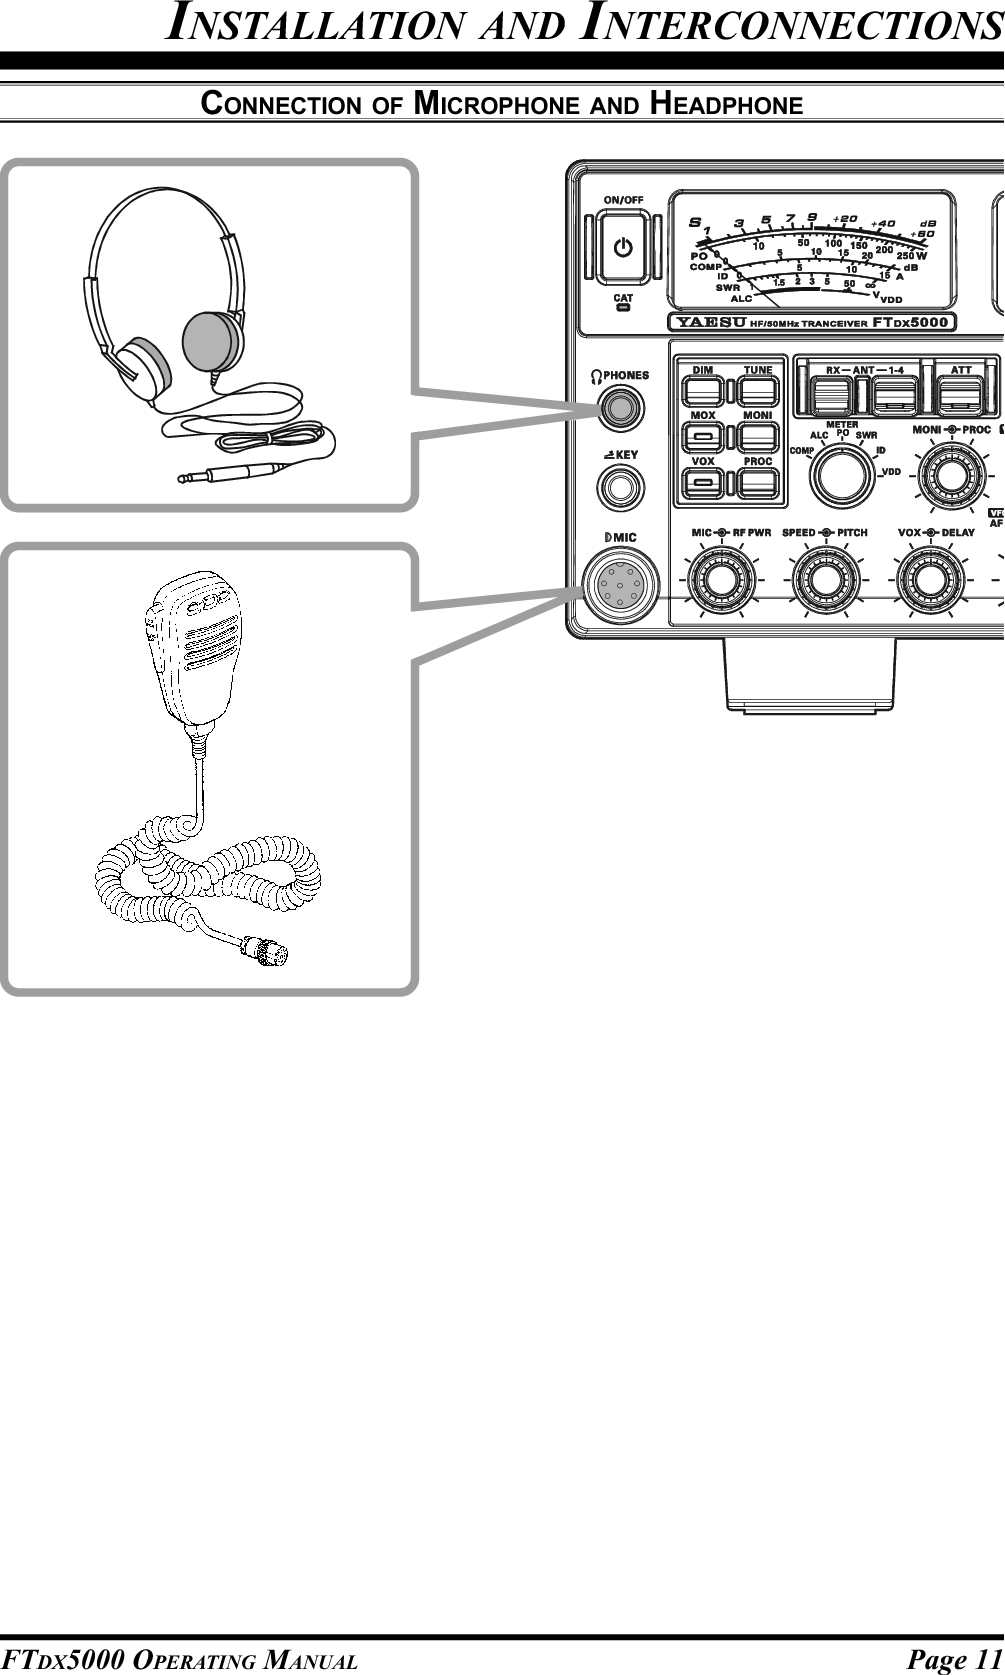 Page 11FTDX5000 OPERATING MANUALCONNECTION OF MICROPHONE AND HEADPHONEINSTALLATION AND INTERCONNECTIONS